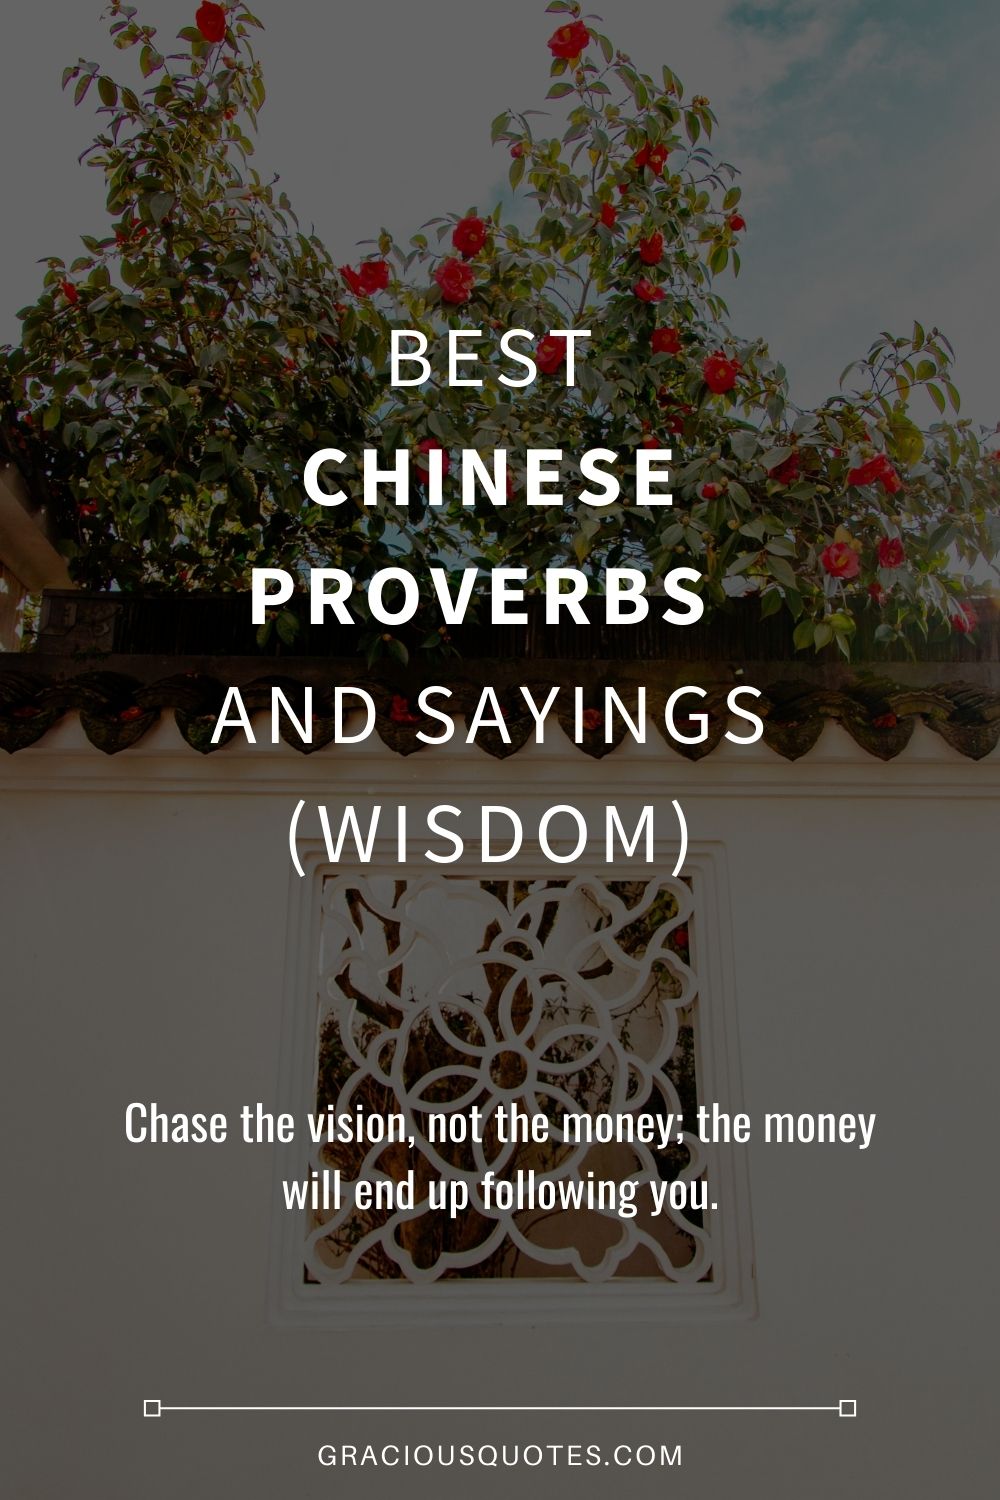 Best Chinese Proverbs and Sayings (WISDOM) - Gracious Quotes